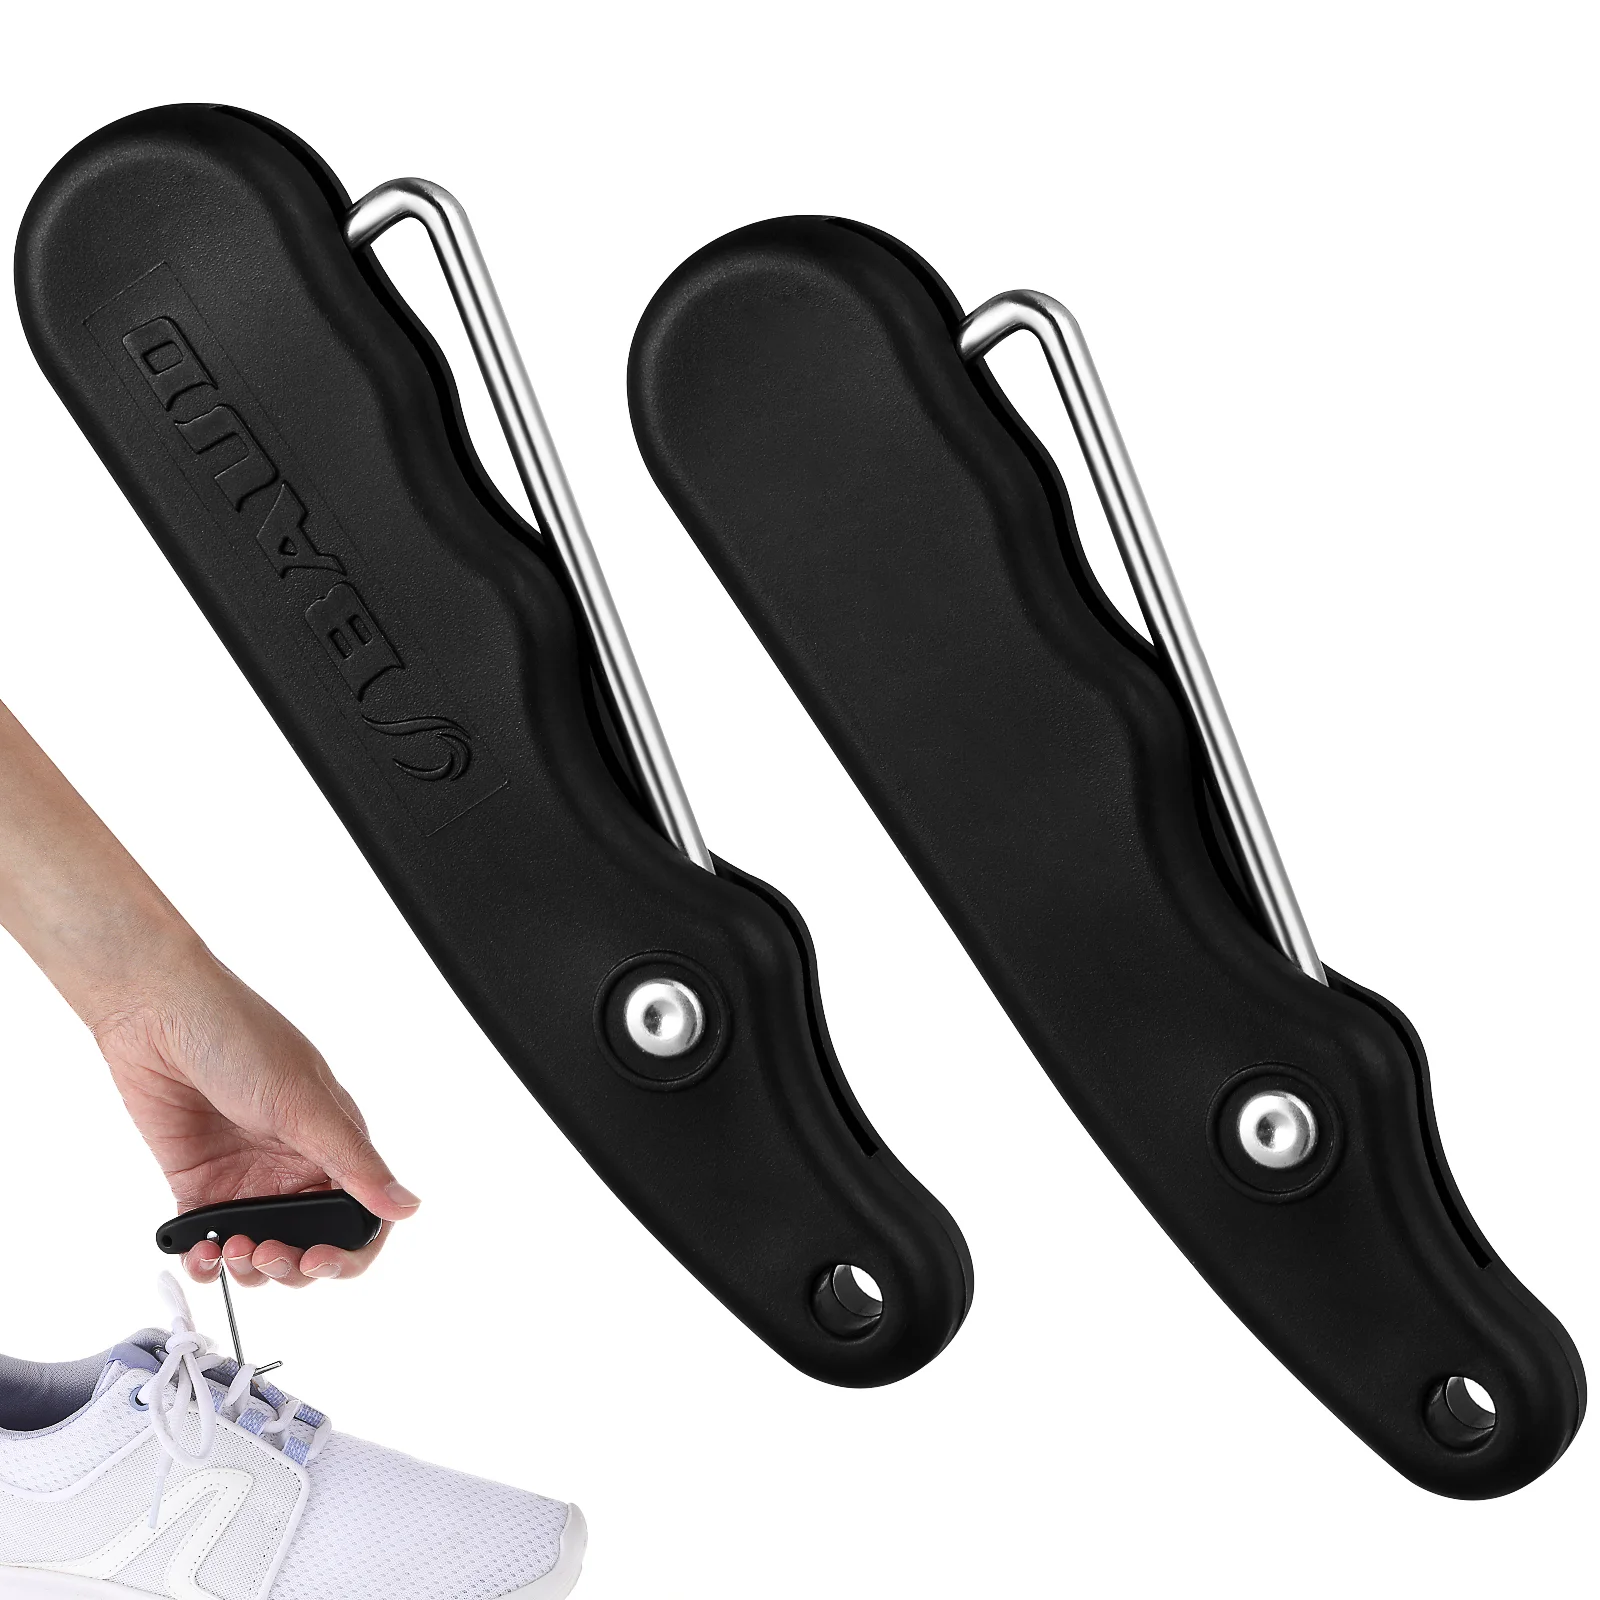 

Ice Skate Lace Tighteners Skate Puller Tools For Kids/Adult No Tie Shoe Laces Portable Folding Lace Tighteners Accessory